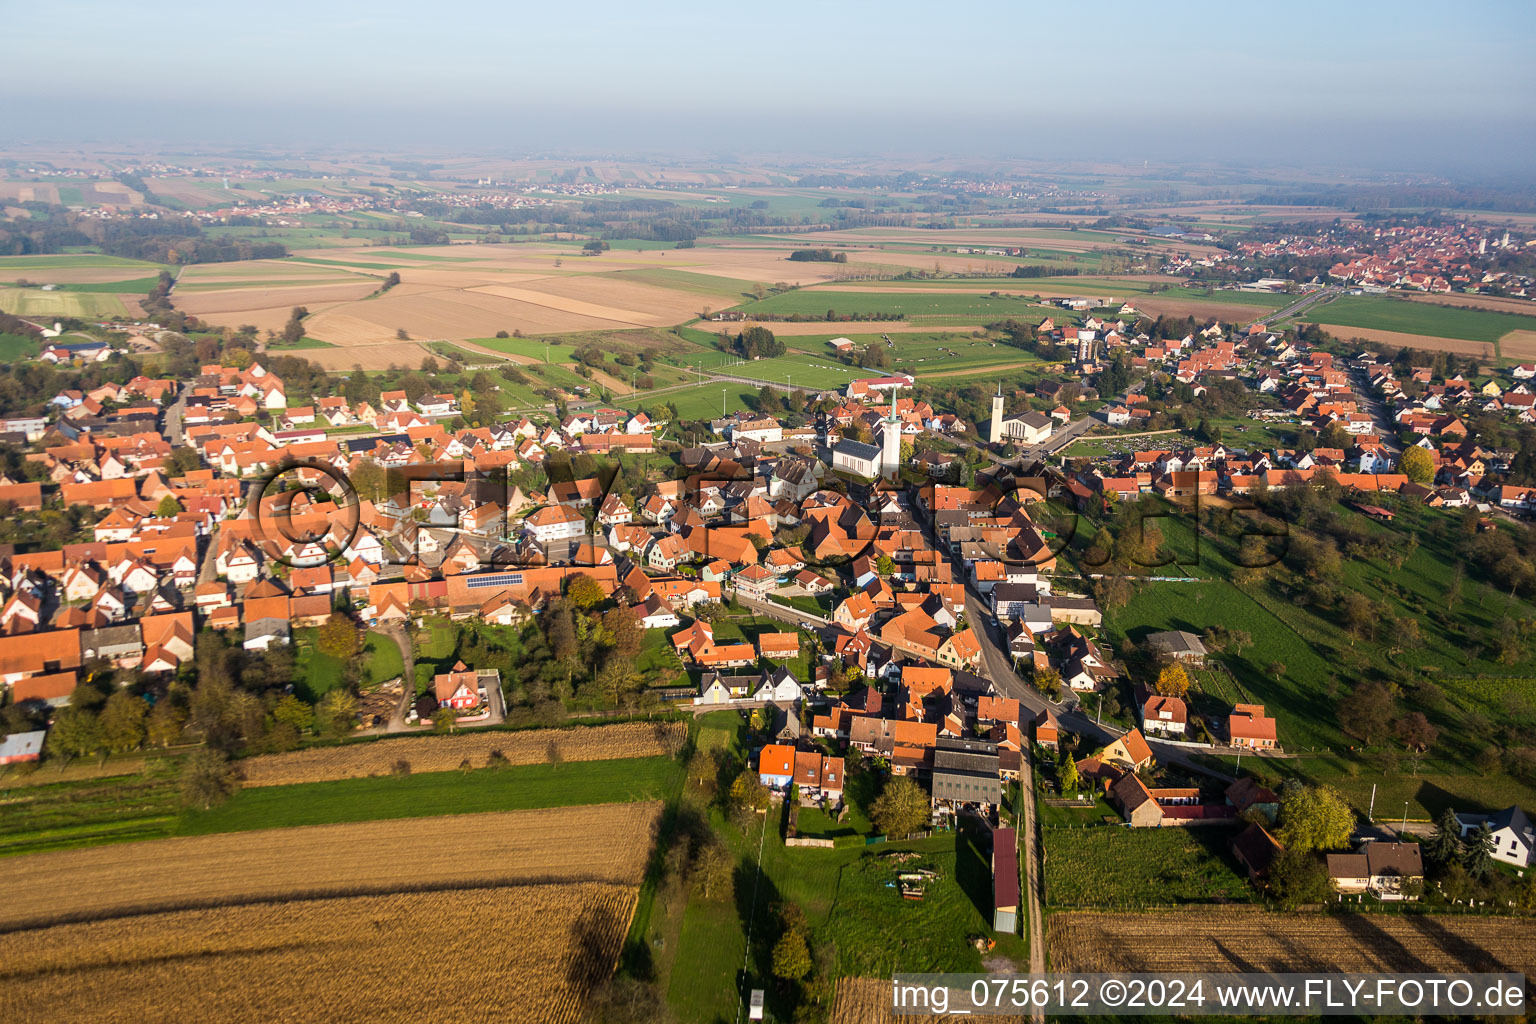 Village - view on the edge of agricultural fields and farmland in Rittershoffen in Grand Est, France